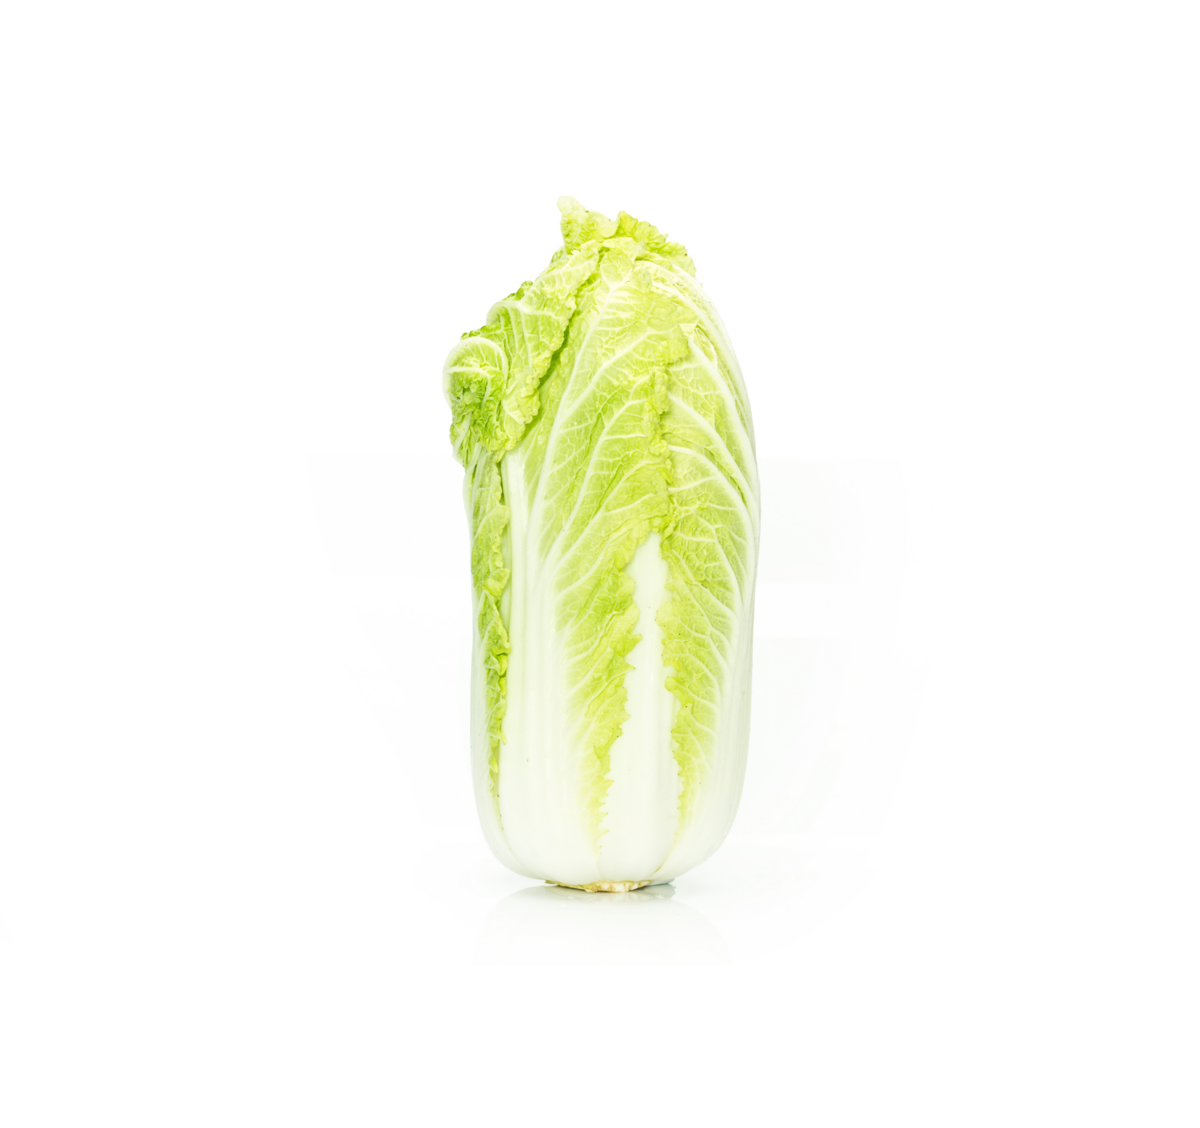 Chinese cabbage cultivation for the best quality Chinese cabbage